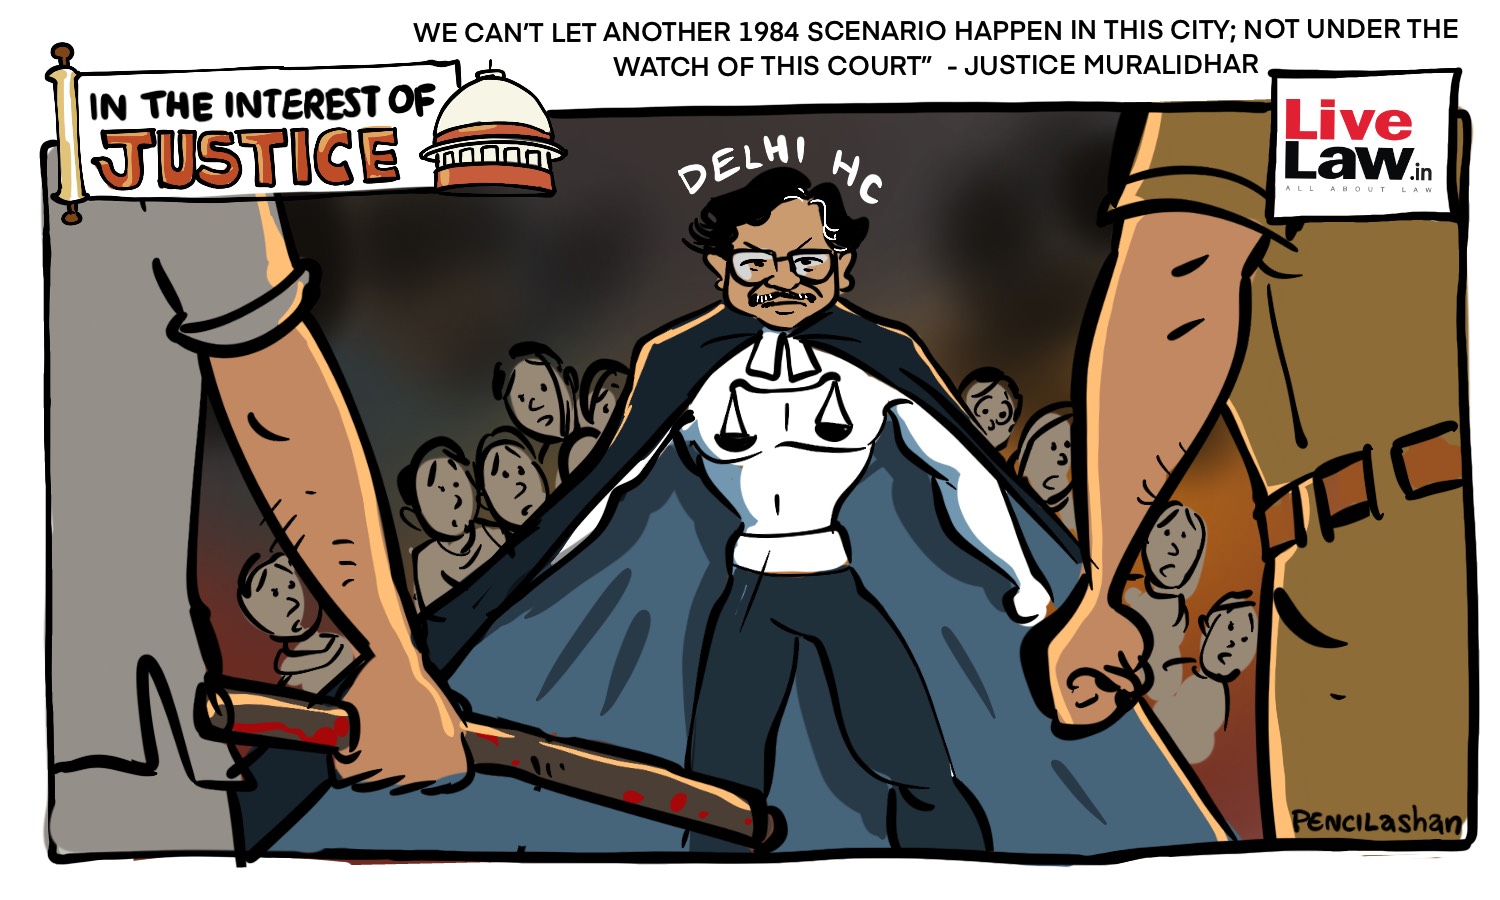 We Cant Let Another 1984 Scenario Happen, Delhi HC Calls For Reach Out To Riot Victims [Cartoon]